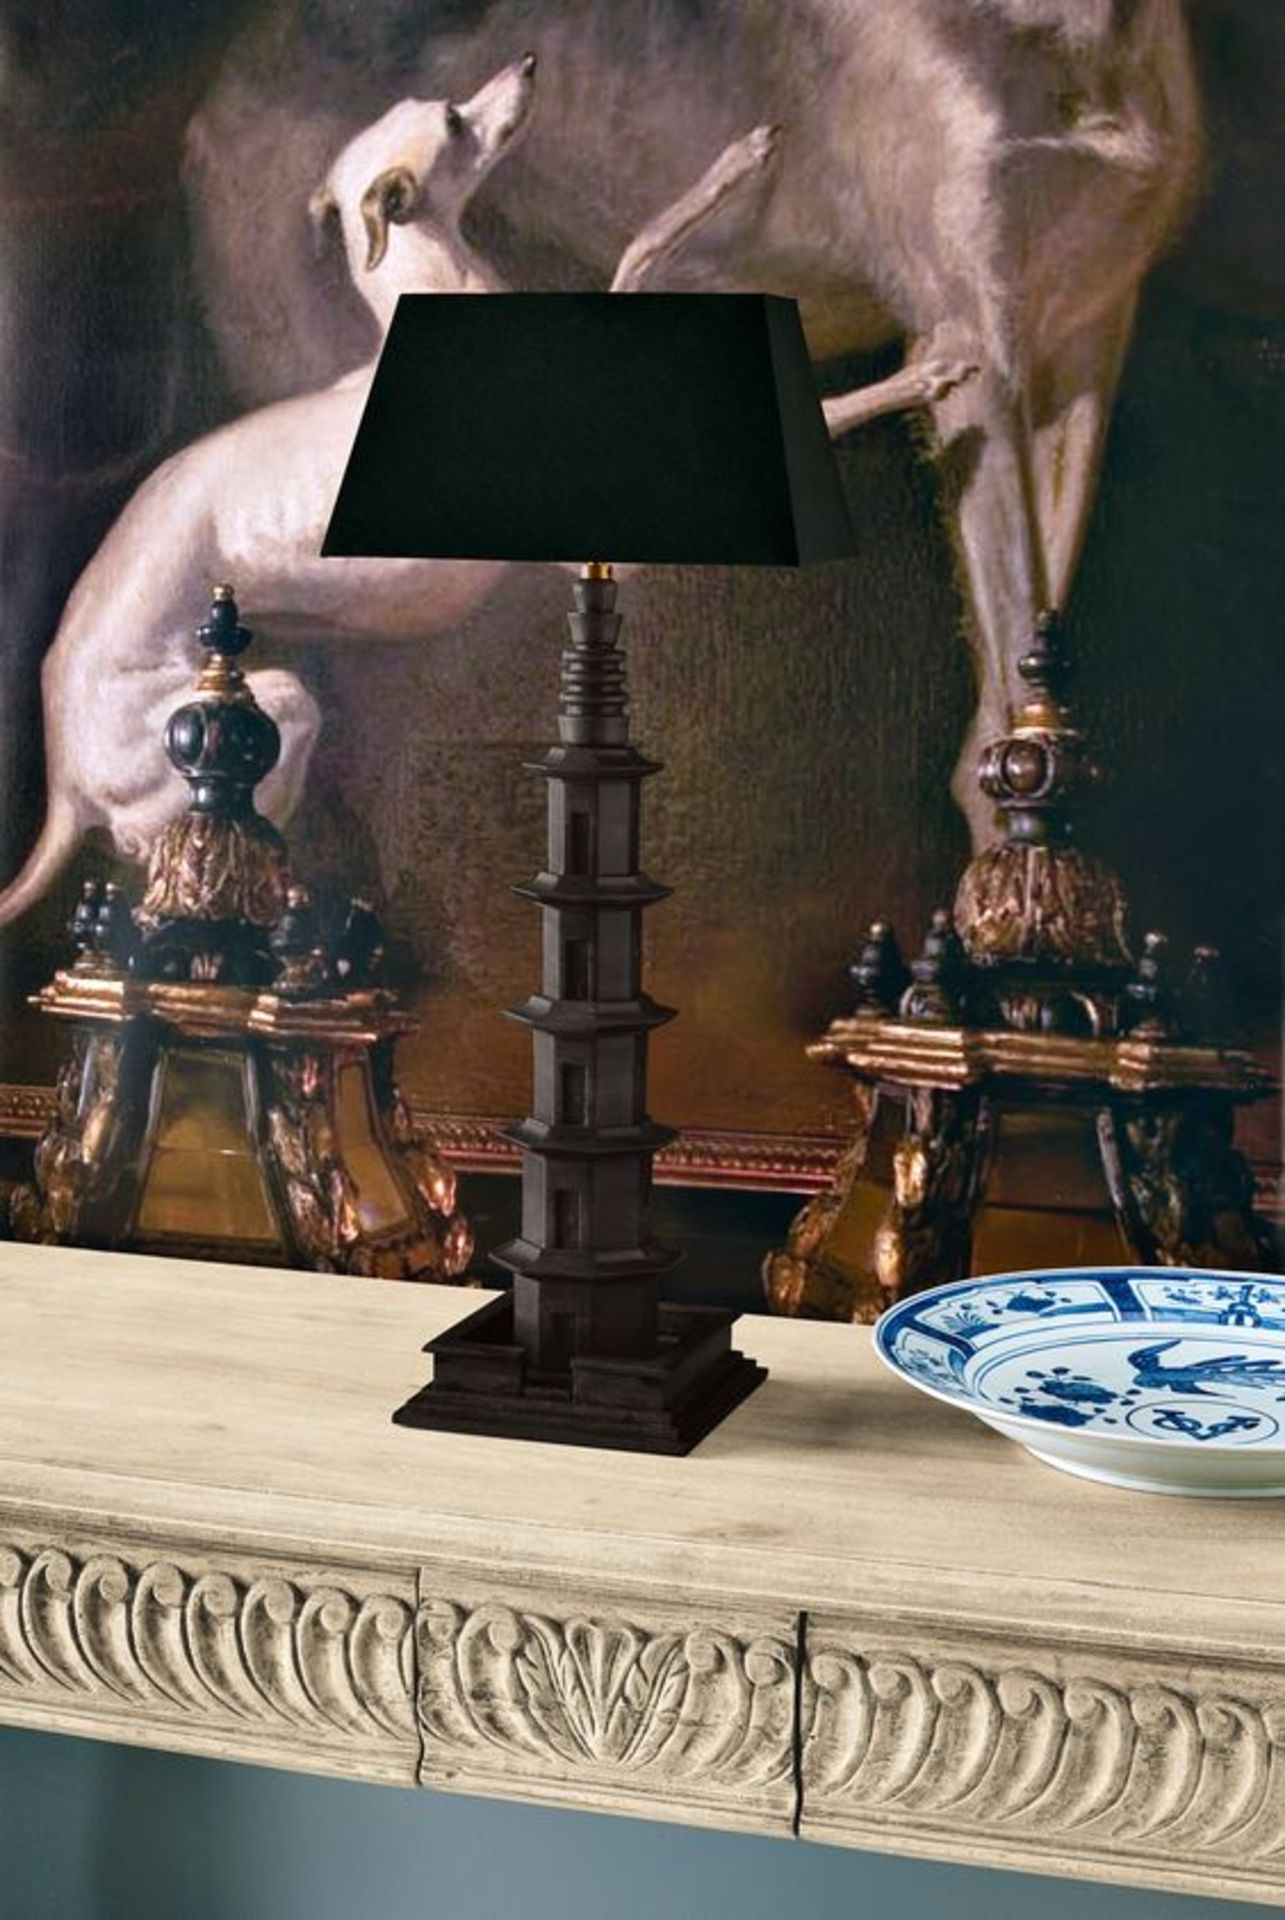 Oka Liaodi Lamp Inspired by a beautiful octagonal Chinese pagoda - down to the carved doors and